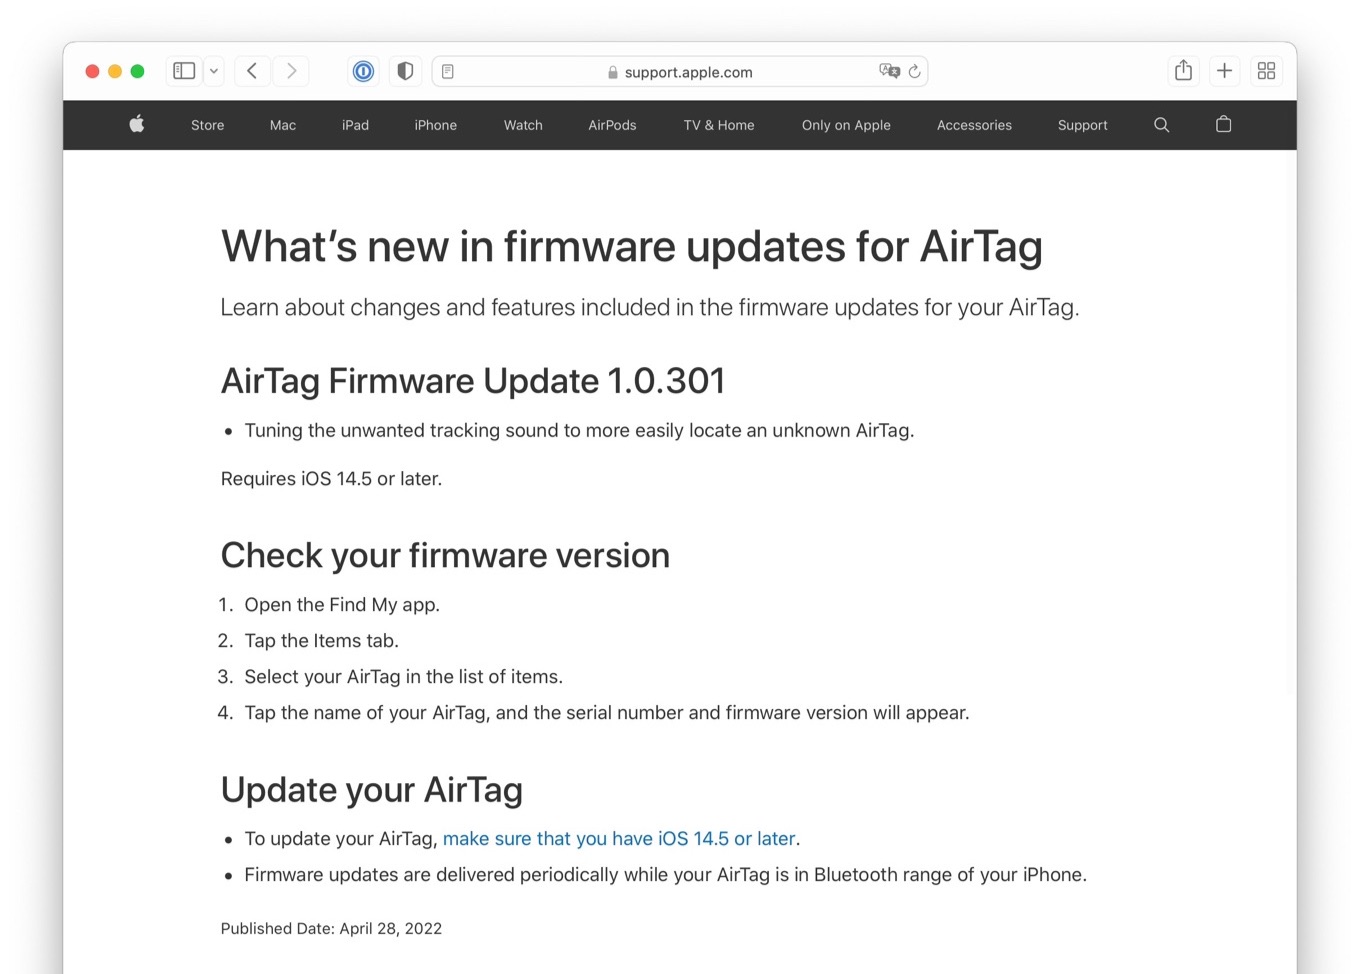 What’s new in firmware updates for AirTag